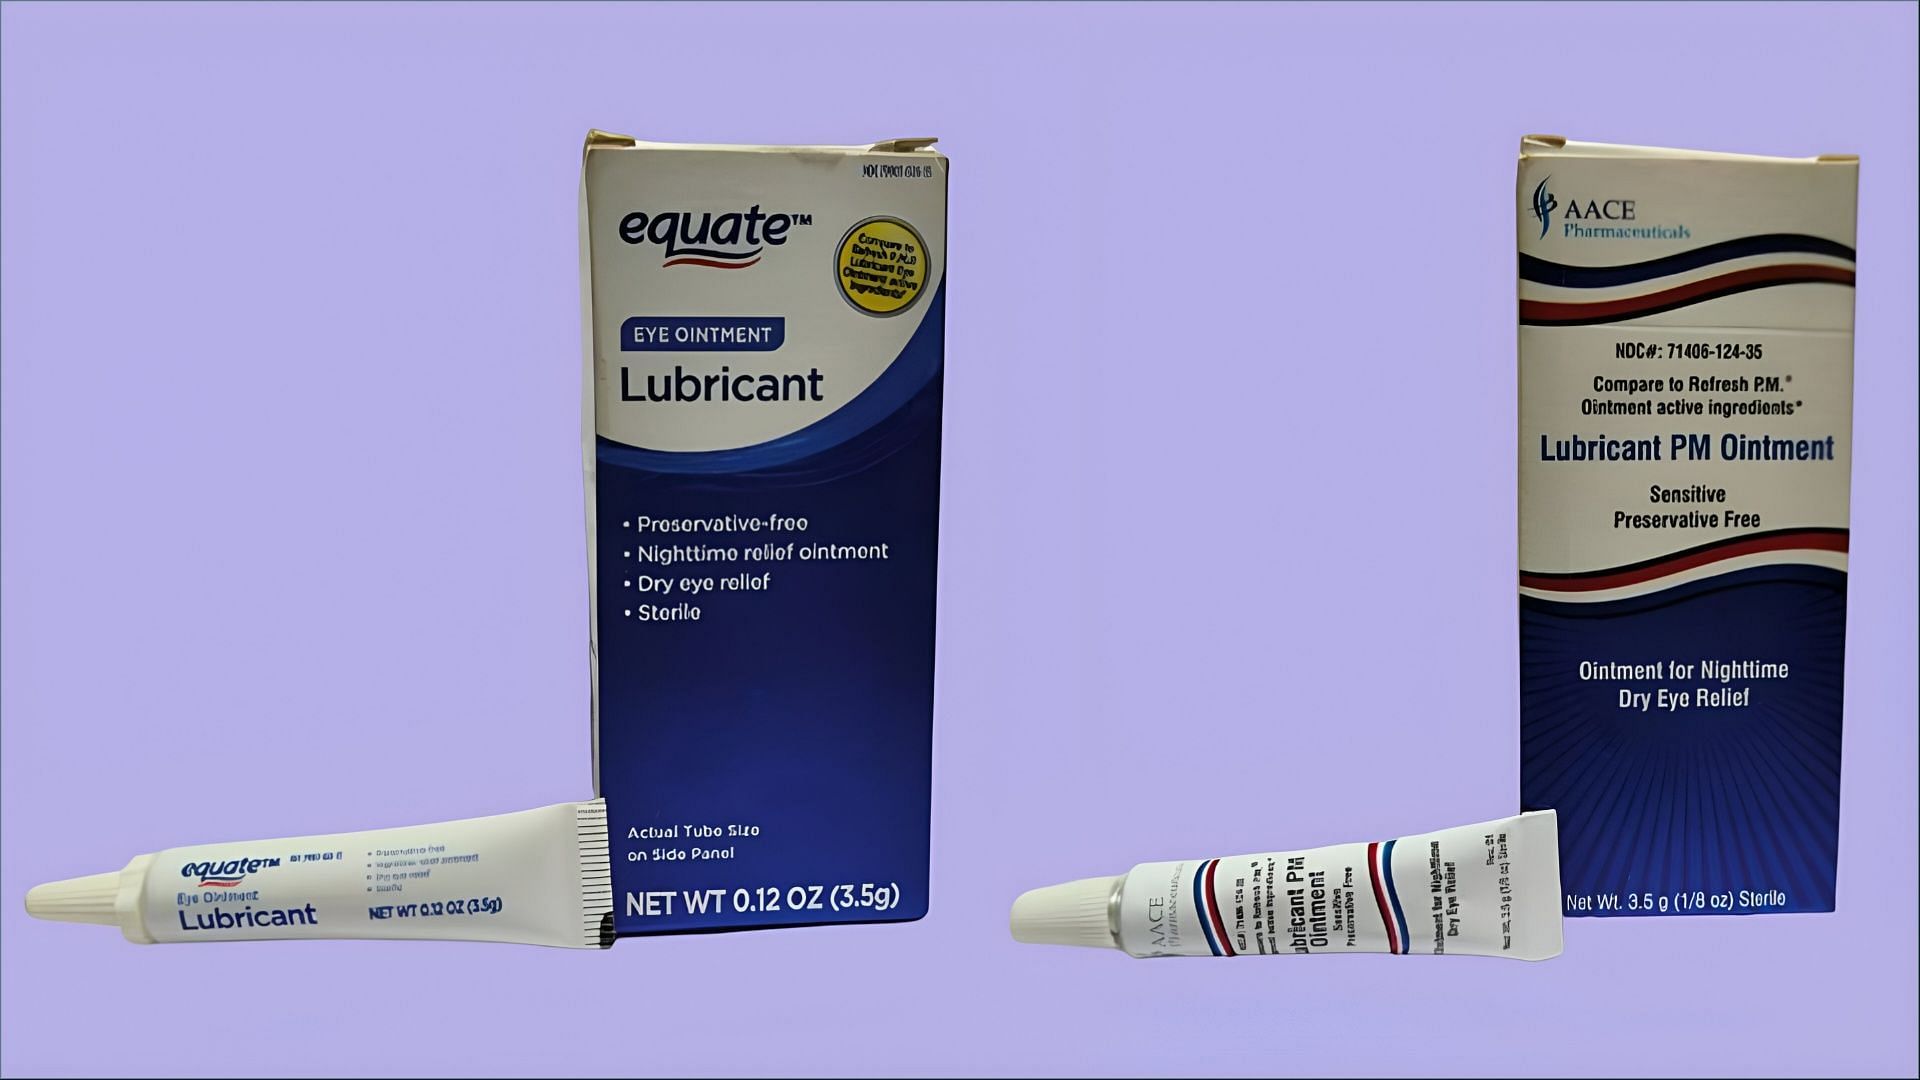 The affected eye ointment products were sold in 3.5-gram tubes (Image via FDA)